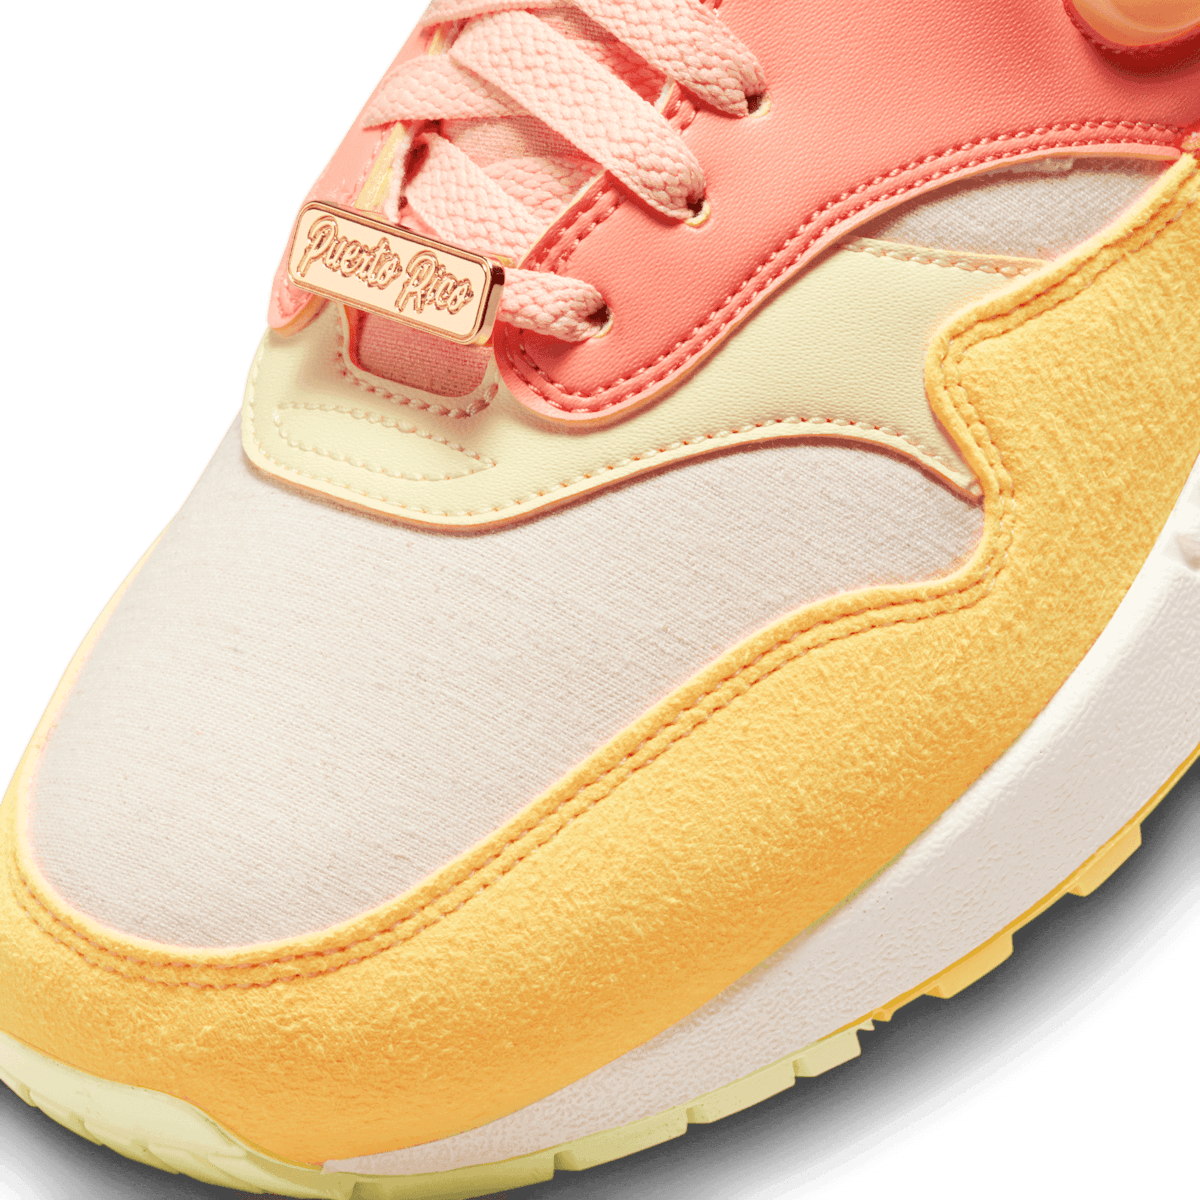 Nike Air Max 1 Puerto Rico Day Orange Frost Angle 4